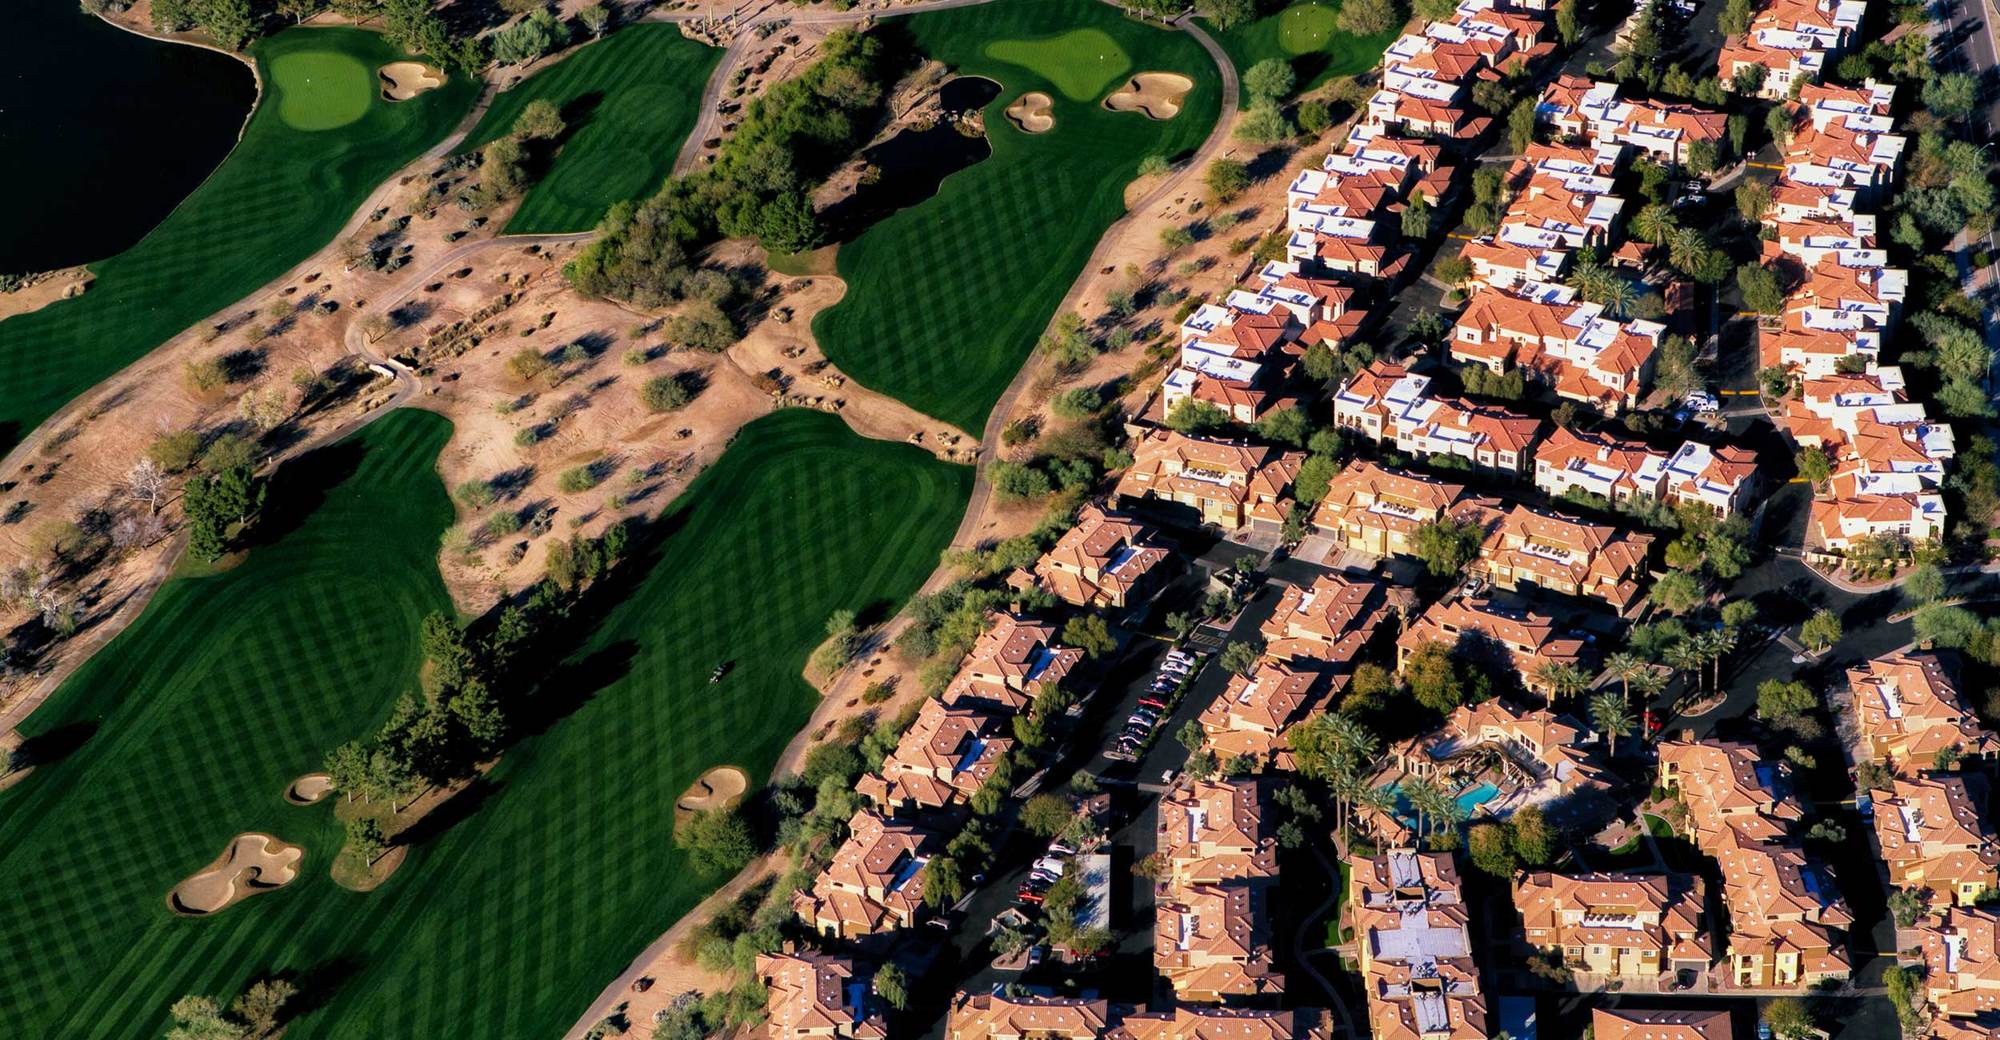 Aerial shot of well kept green golf courses in arizona next to developments March 2022